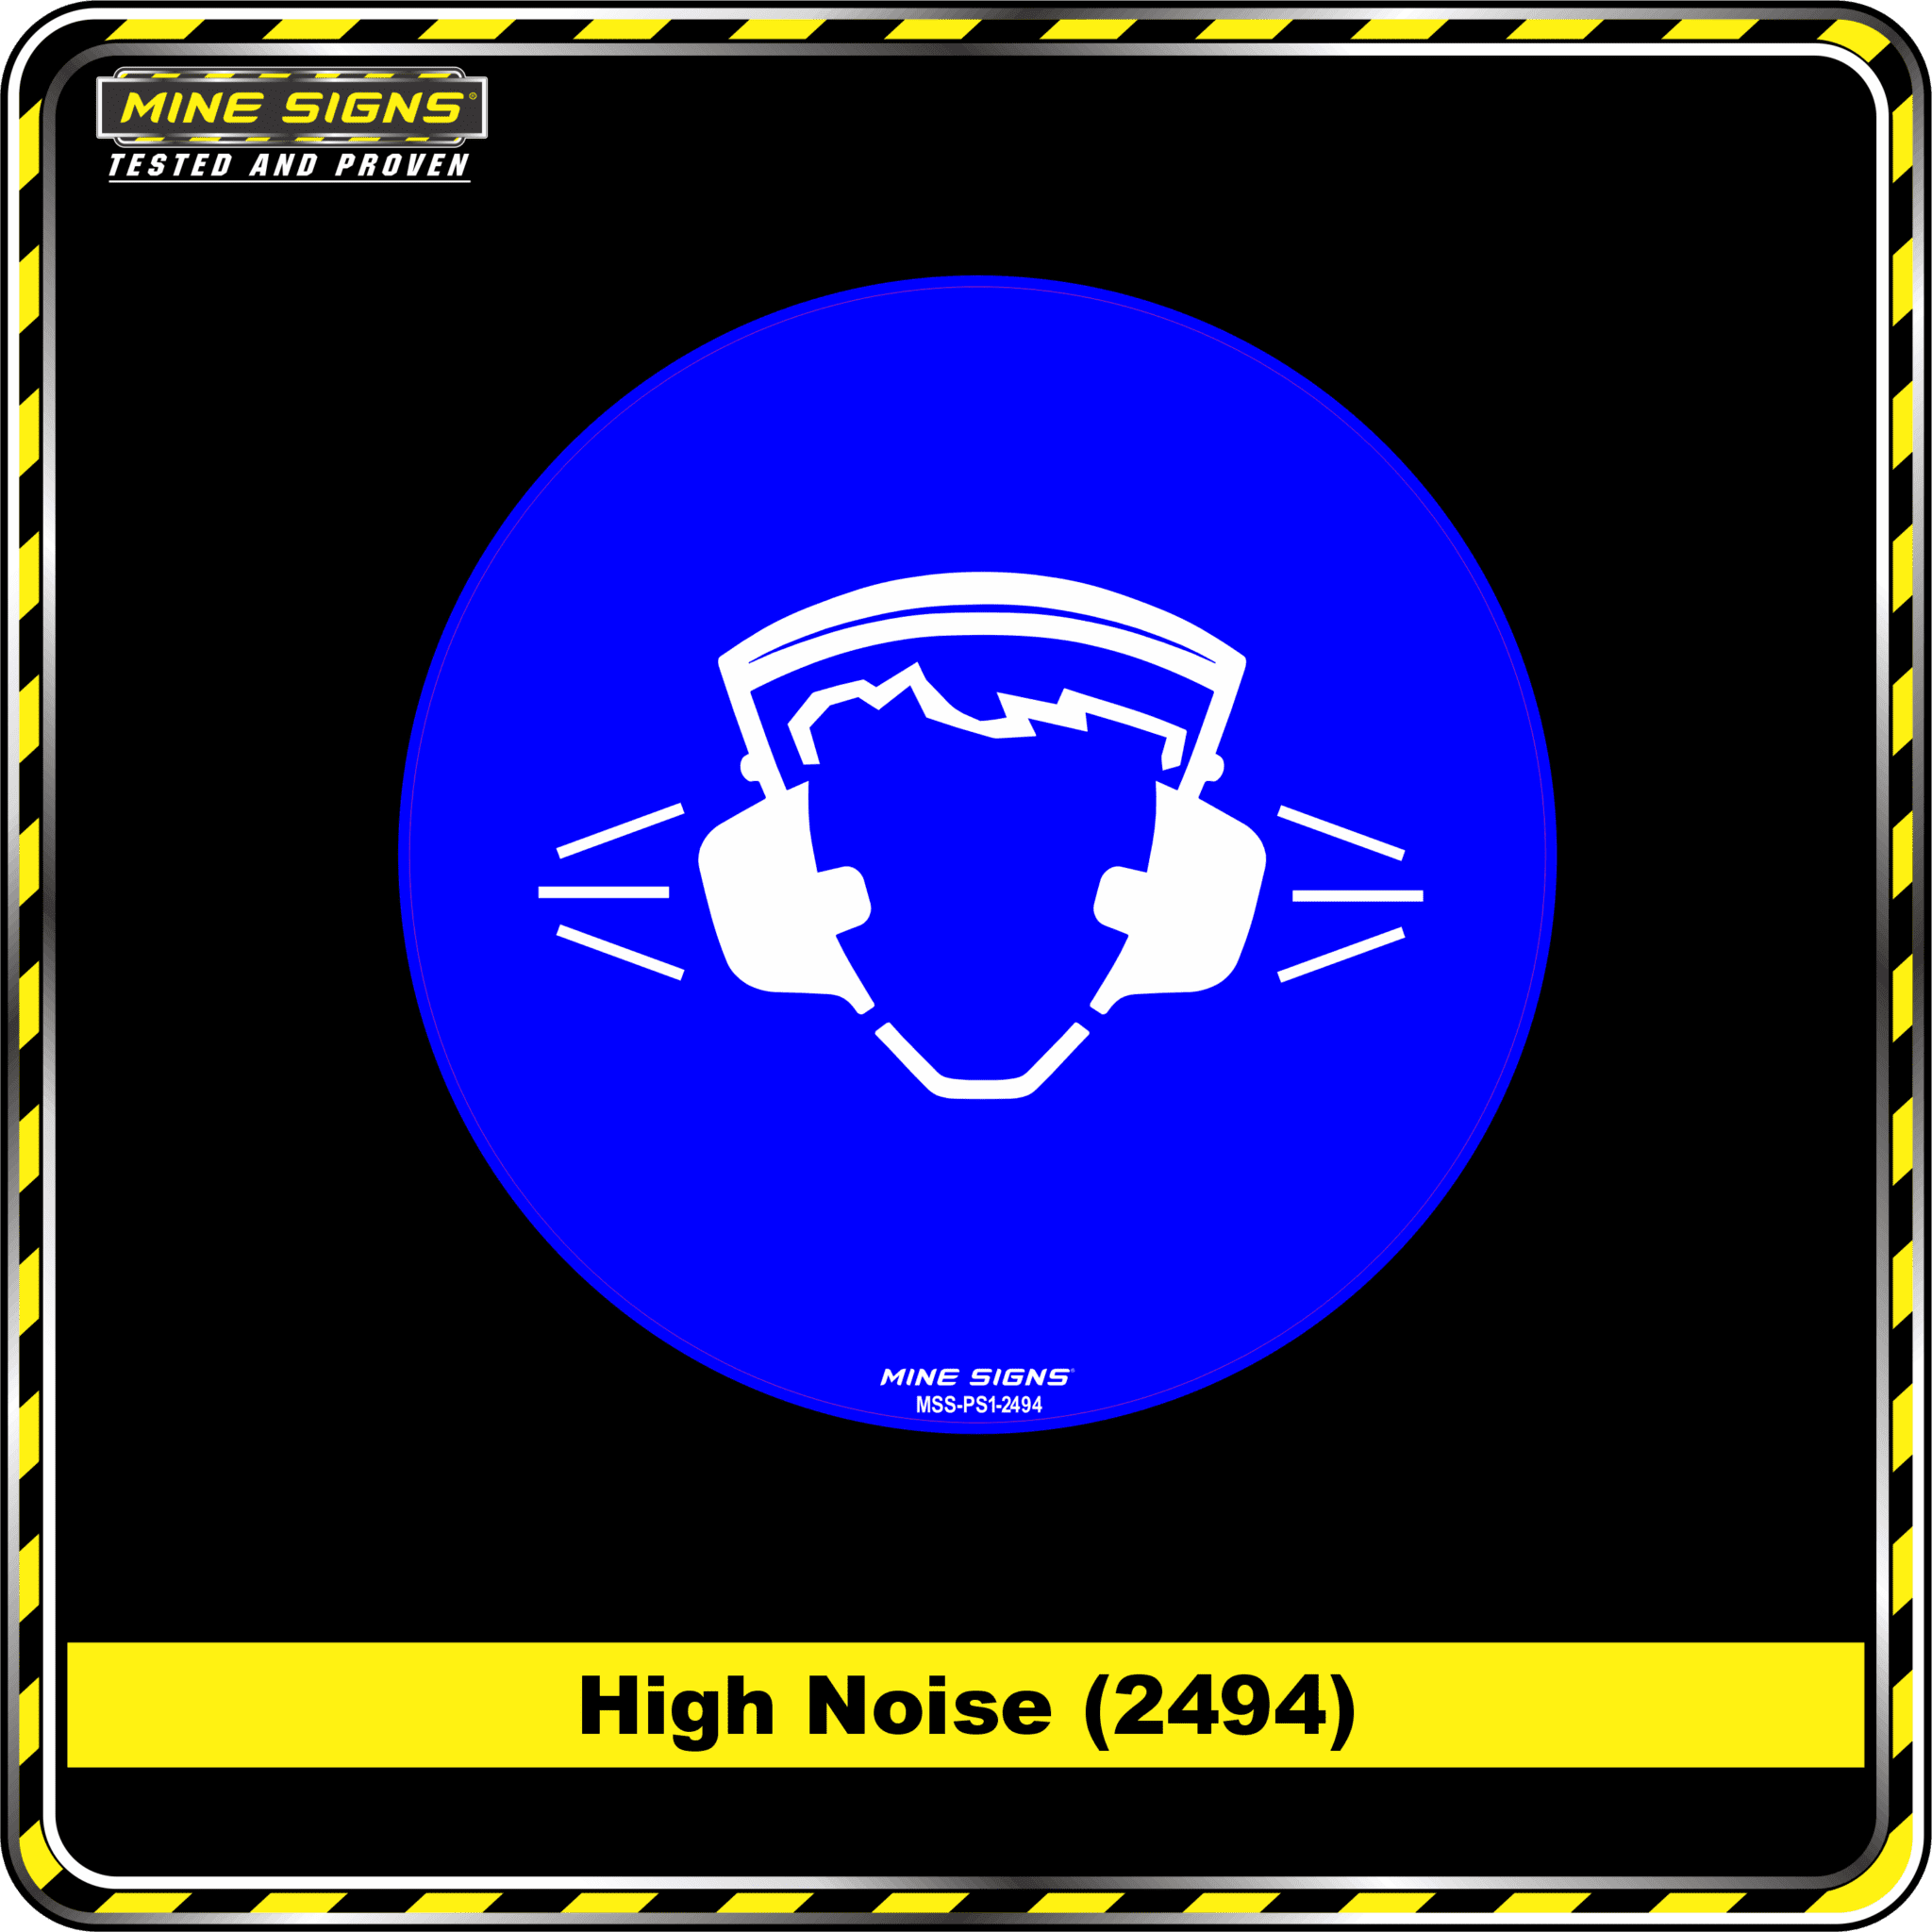 MS - Product Background - Safety Signs - High Noise 2494